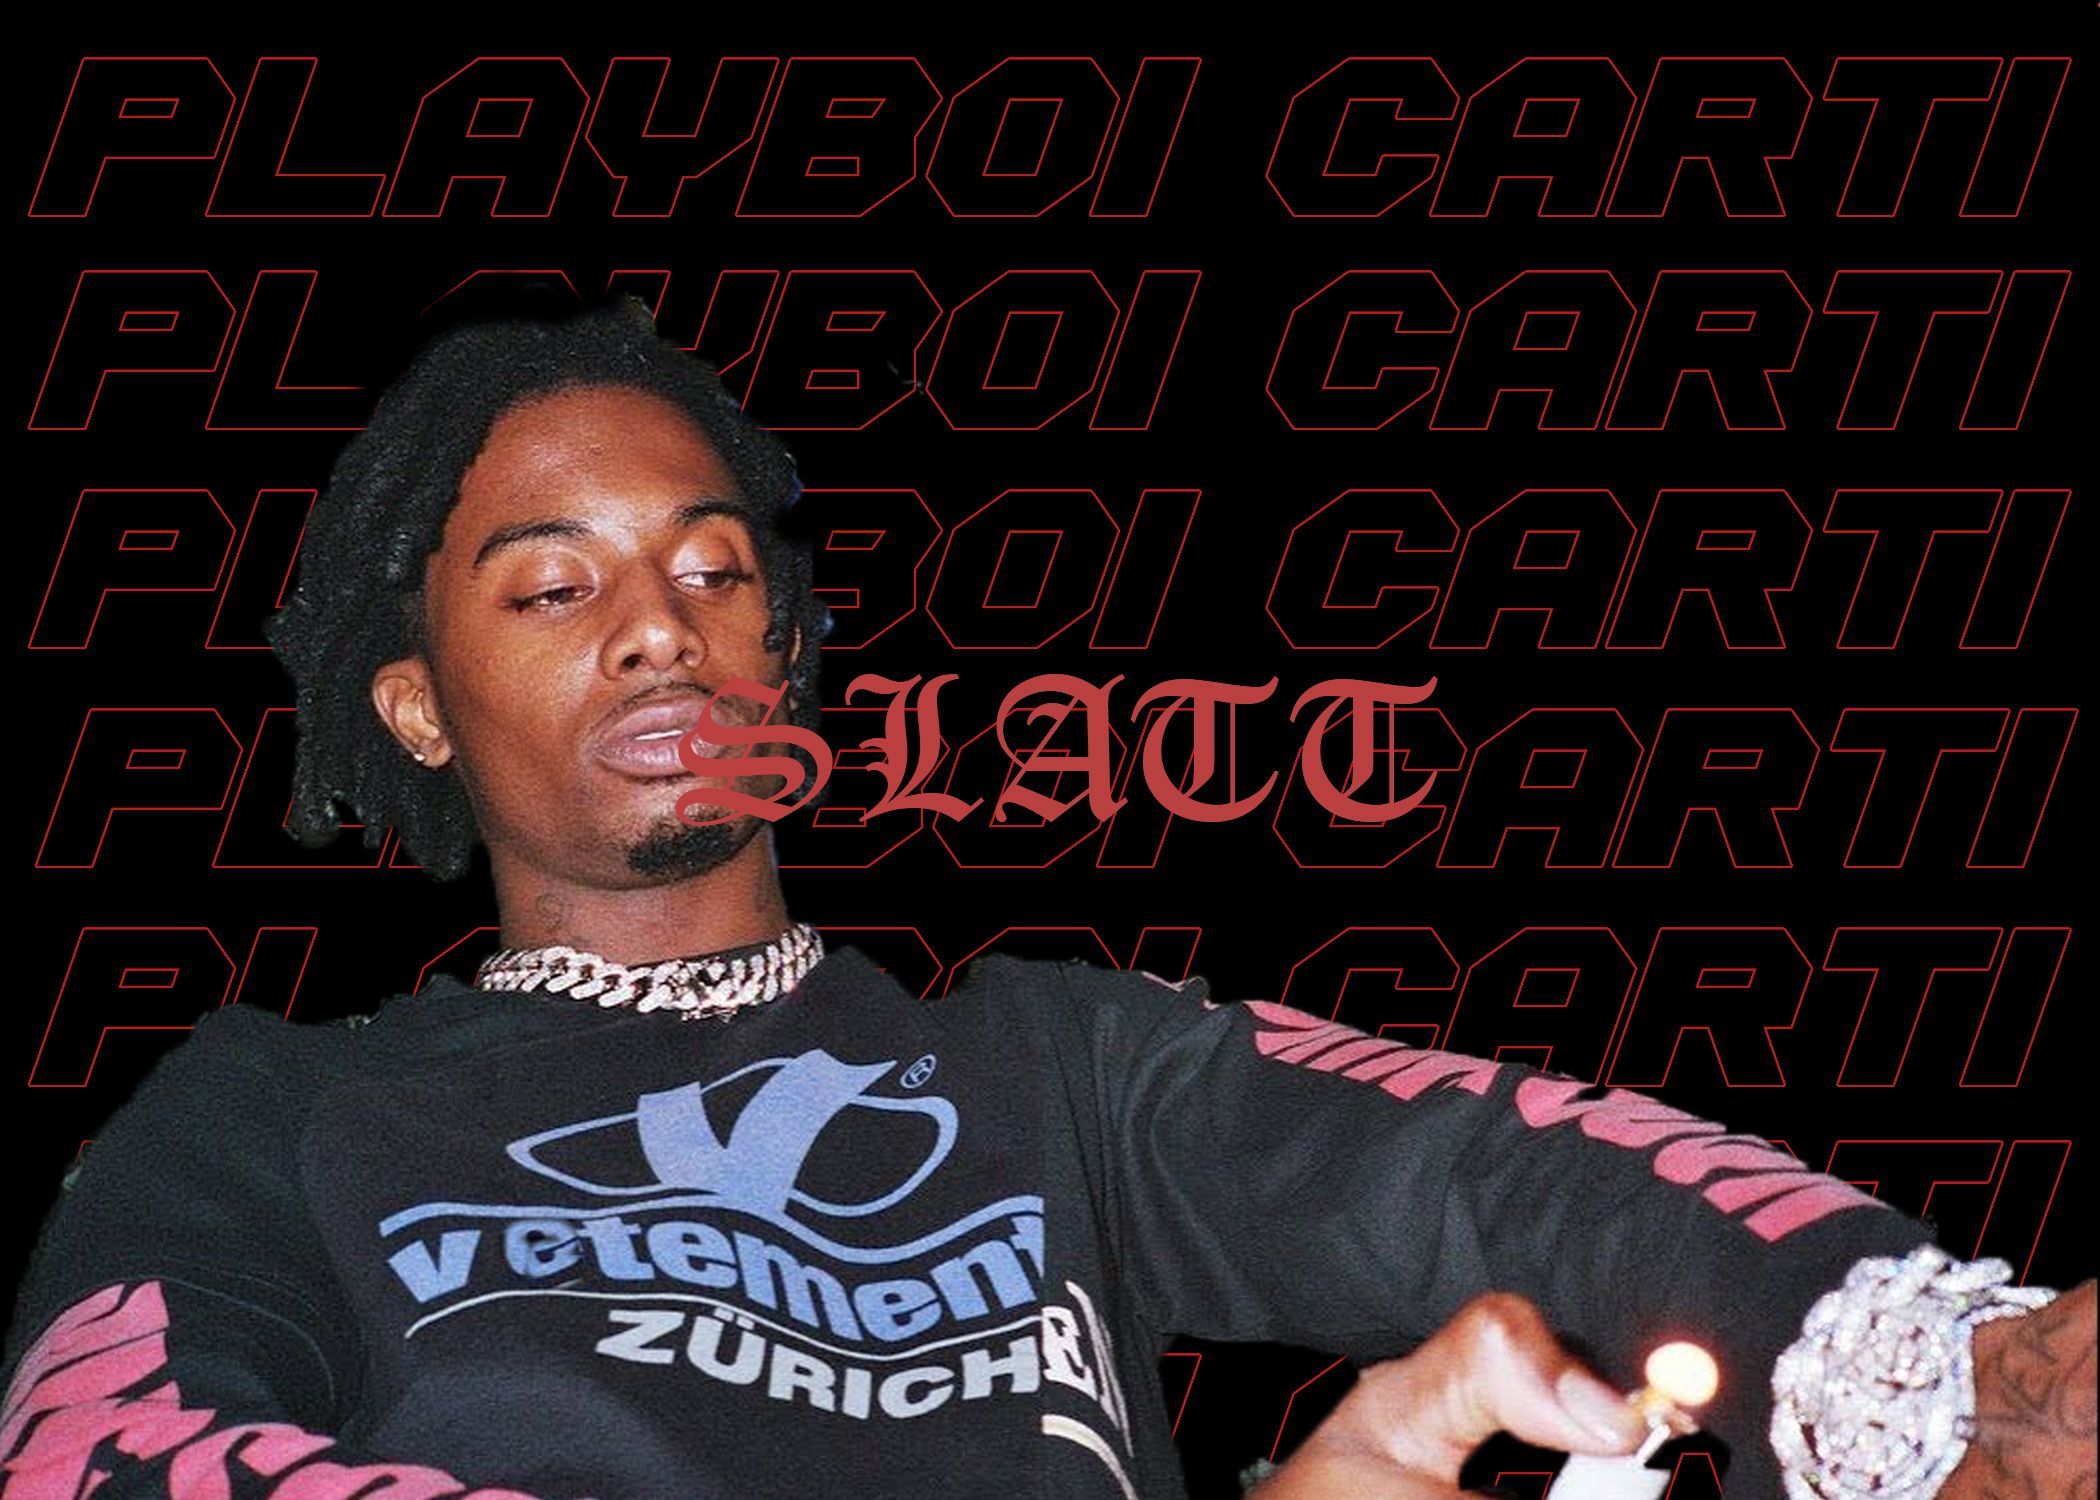 carti is why i edit.